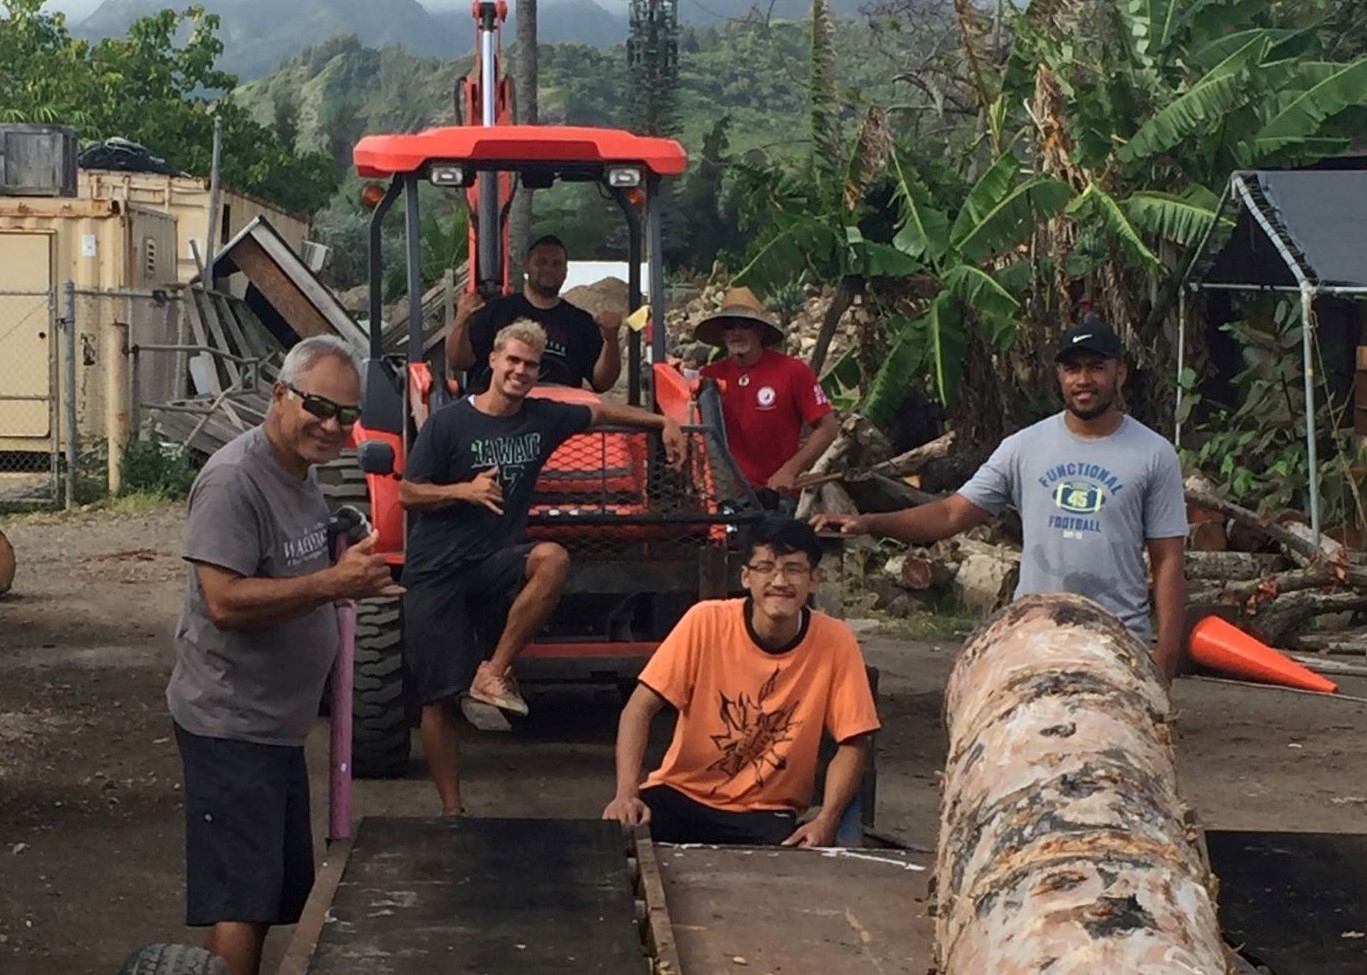 Carvers of Polynesia: Fulfilling the Center’s Mission